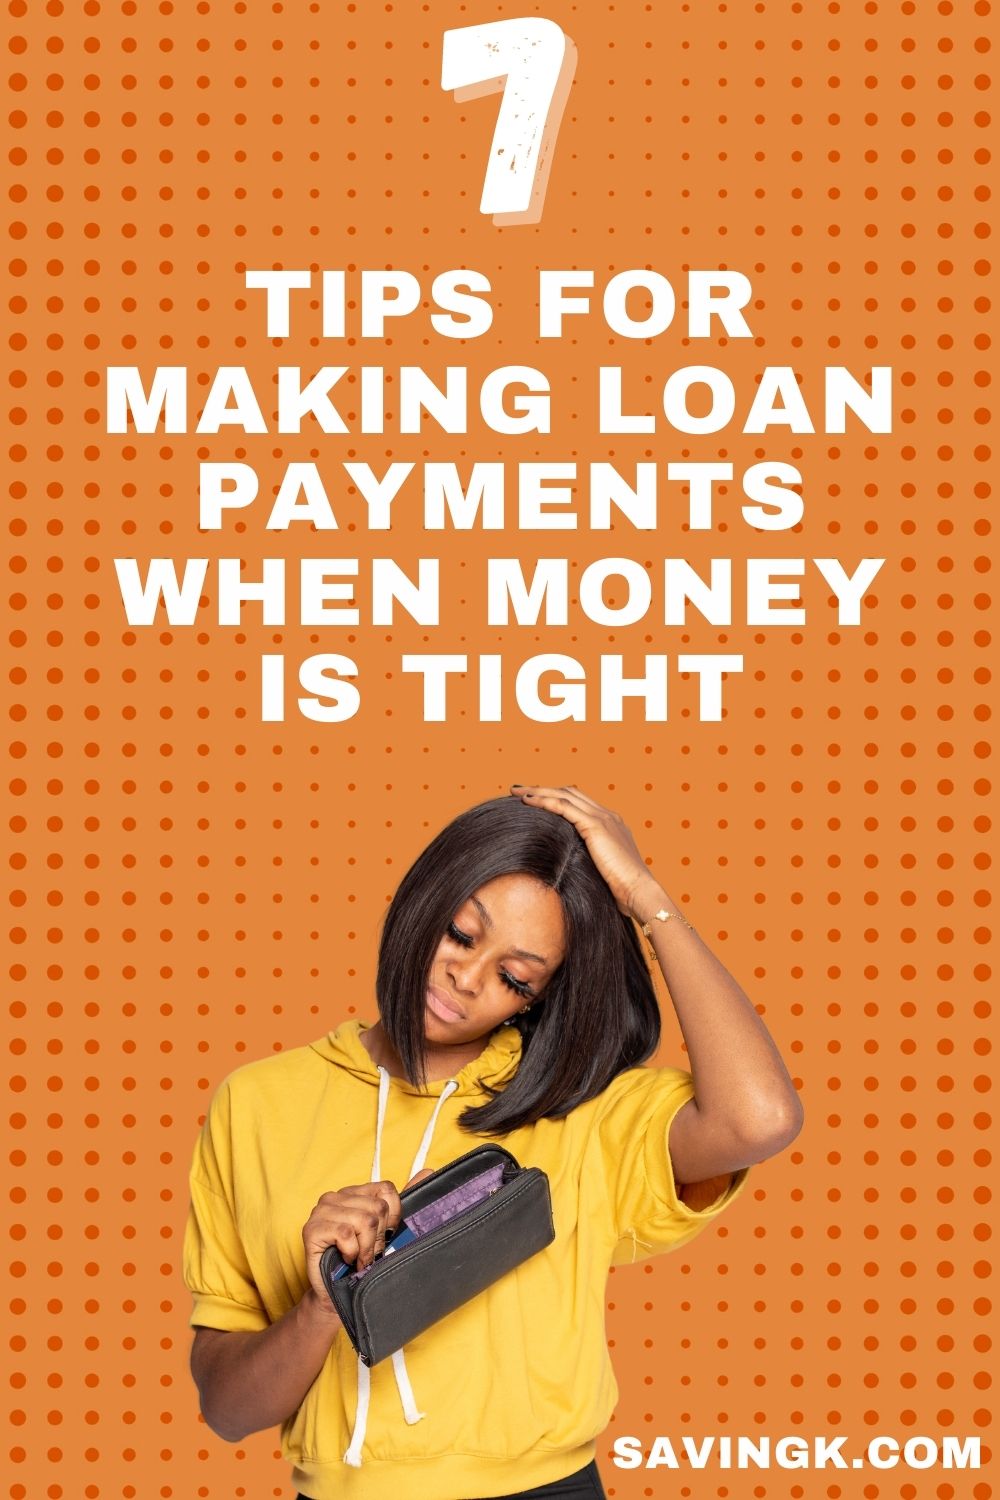 Tips For Making Loan Payments When Money Is Tight